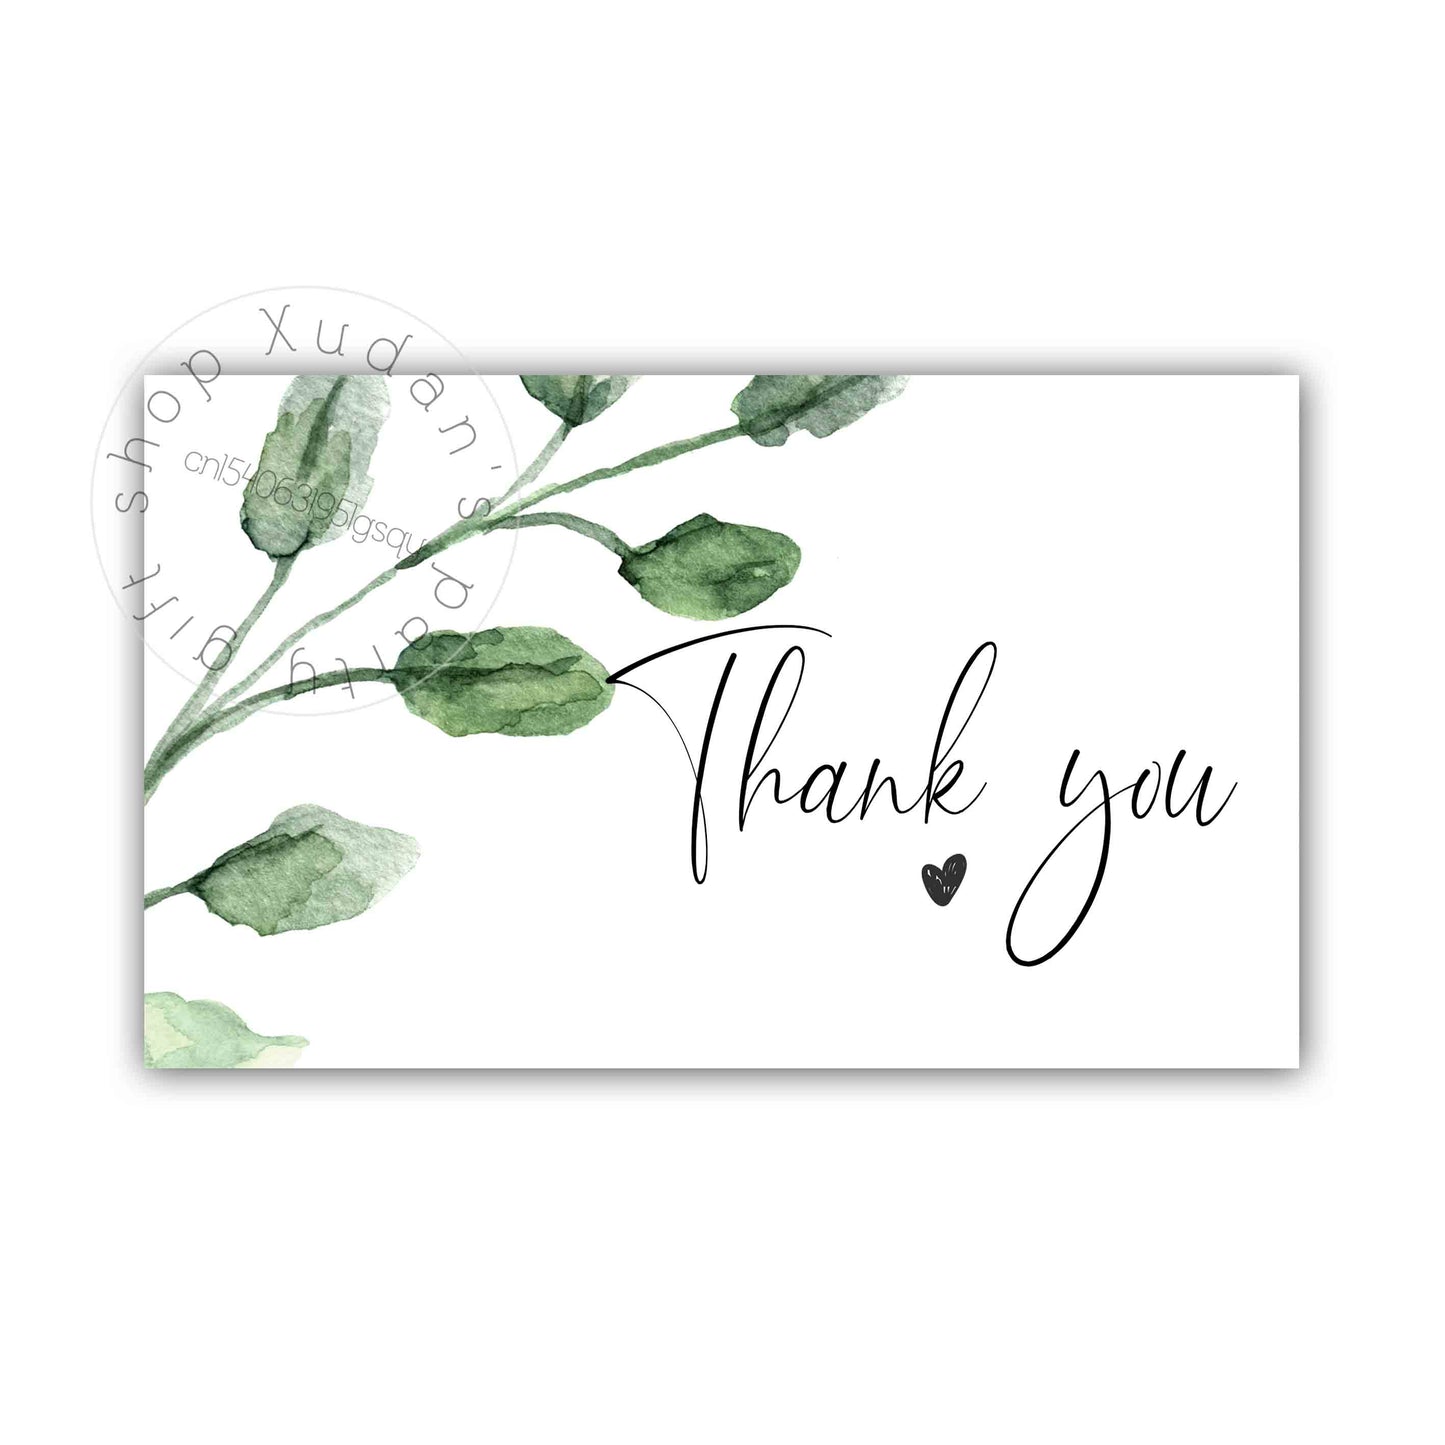 Pink Thank You Card For Supporting Business Package